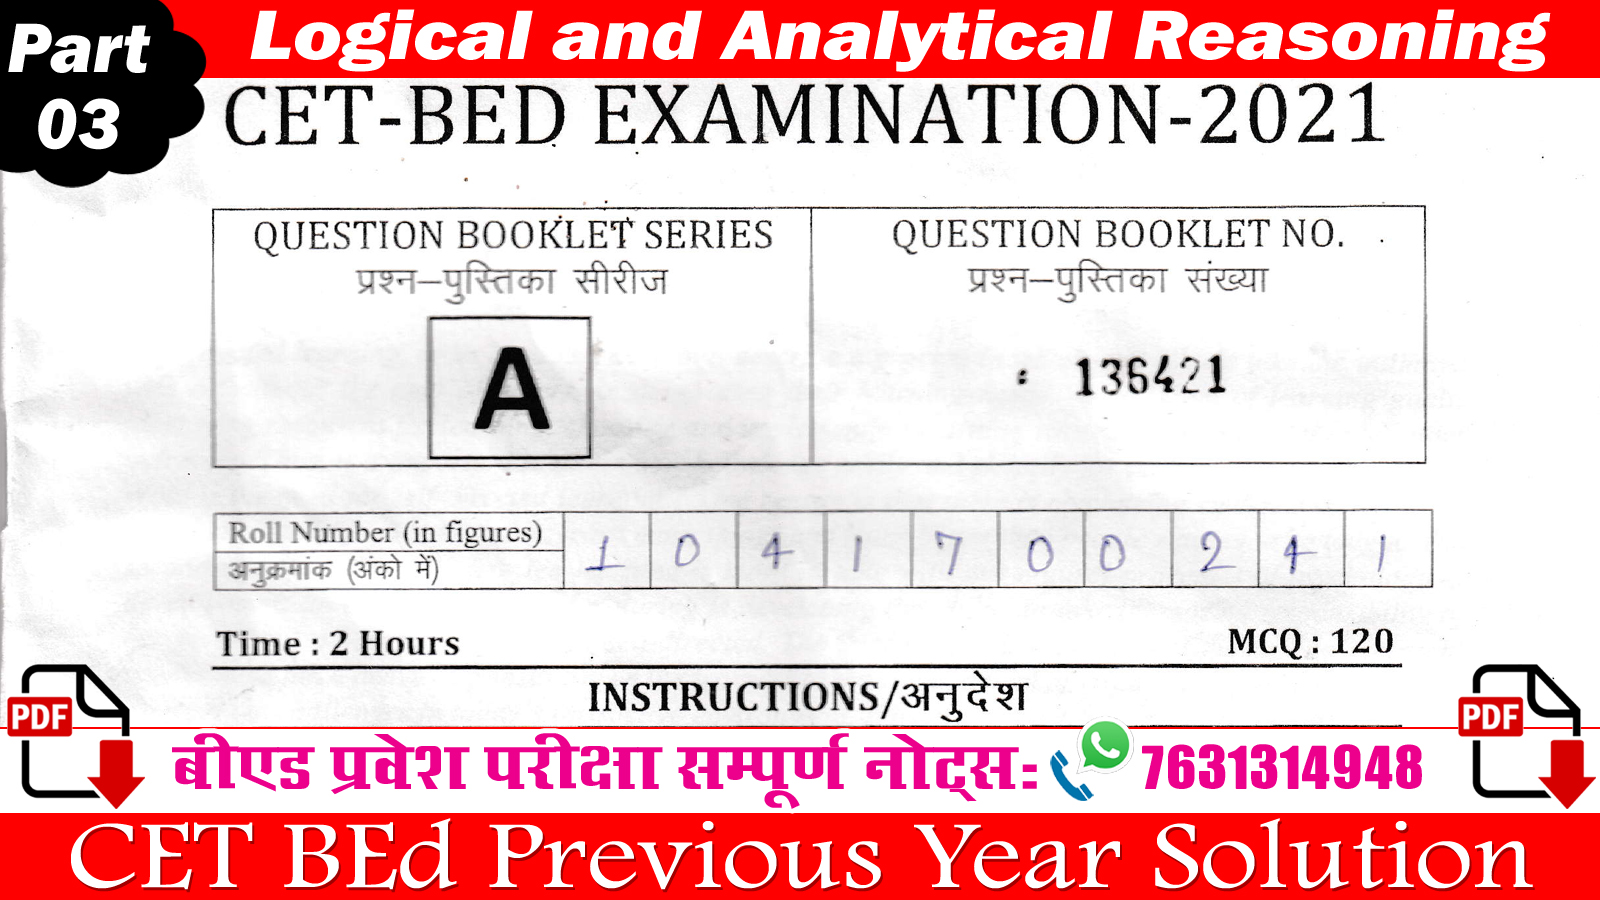 BEd-Reasoning-Solved-Paper-2021-Bihar-CET-BEd-2021-Solution-with-Explanation-Part-03